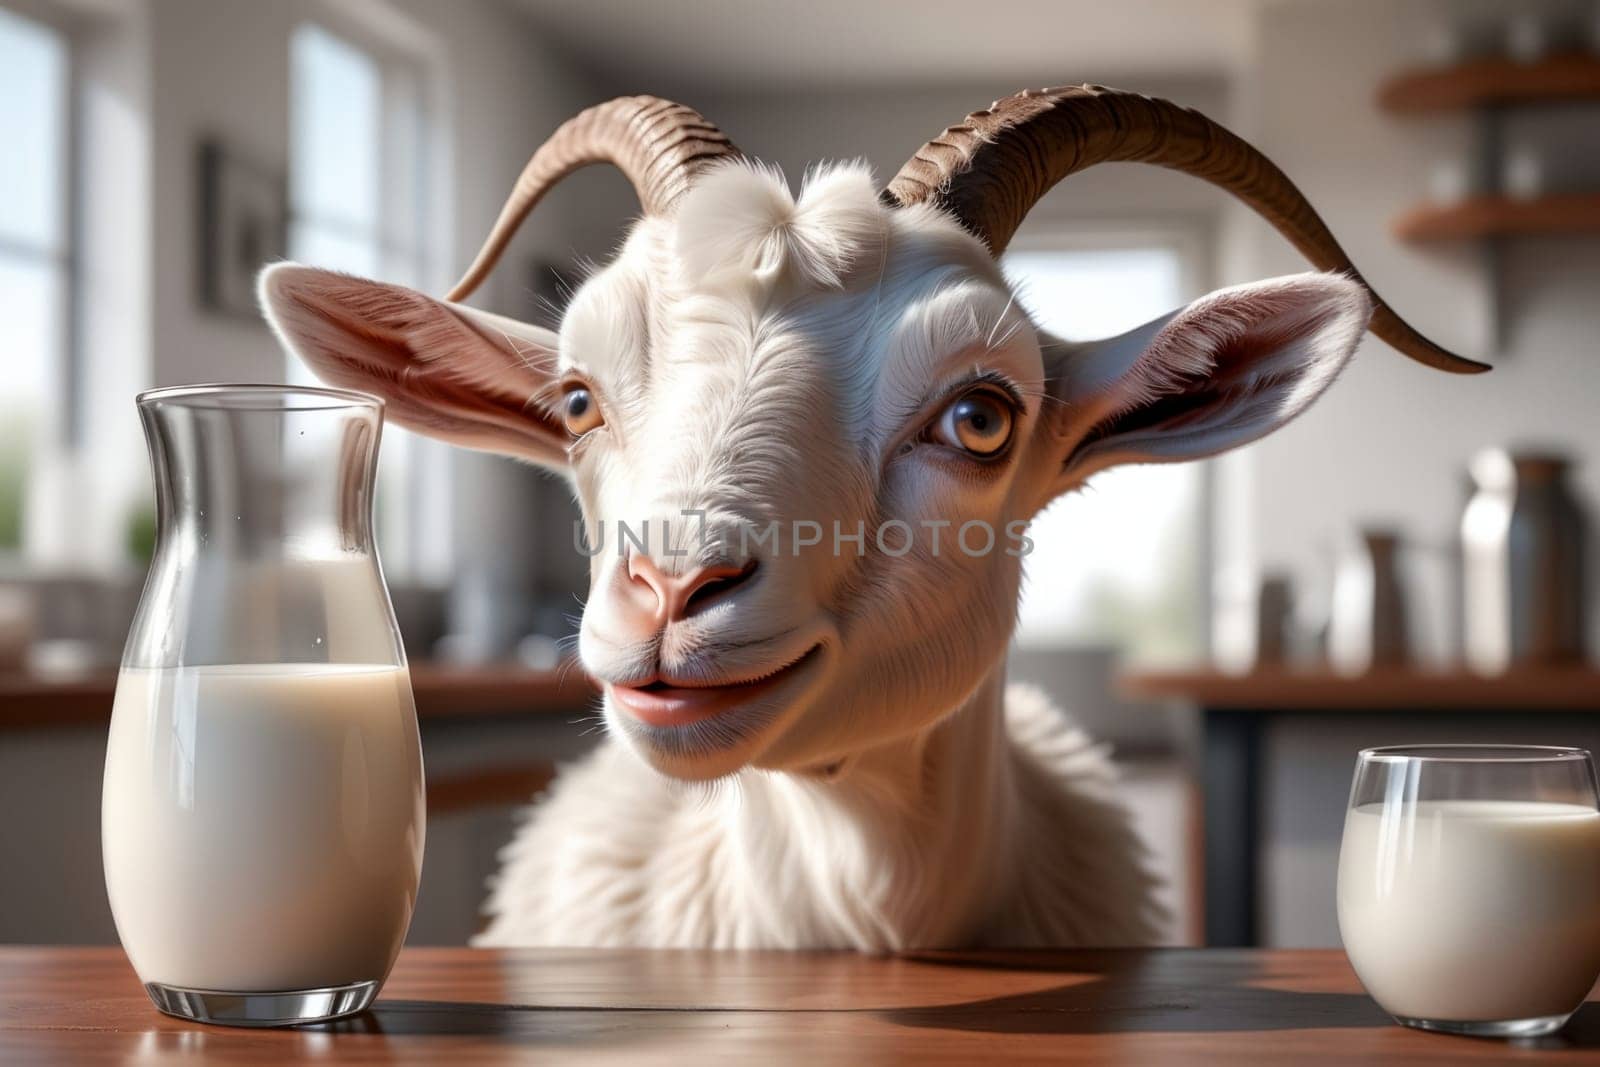 cute goat looking at fresh milk in a glass .